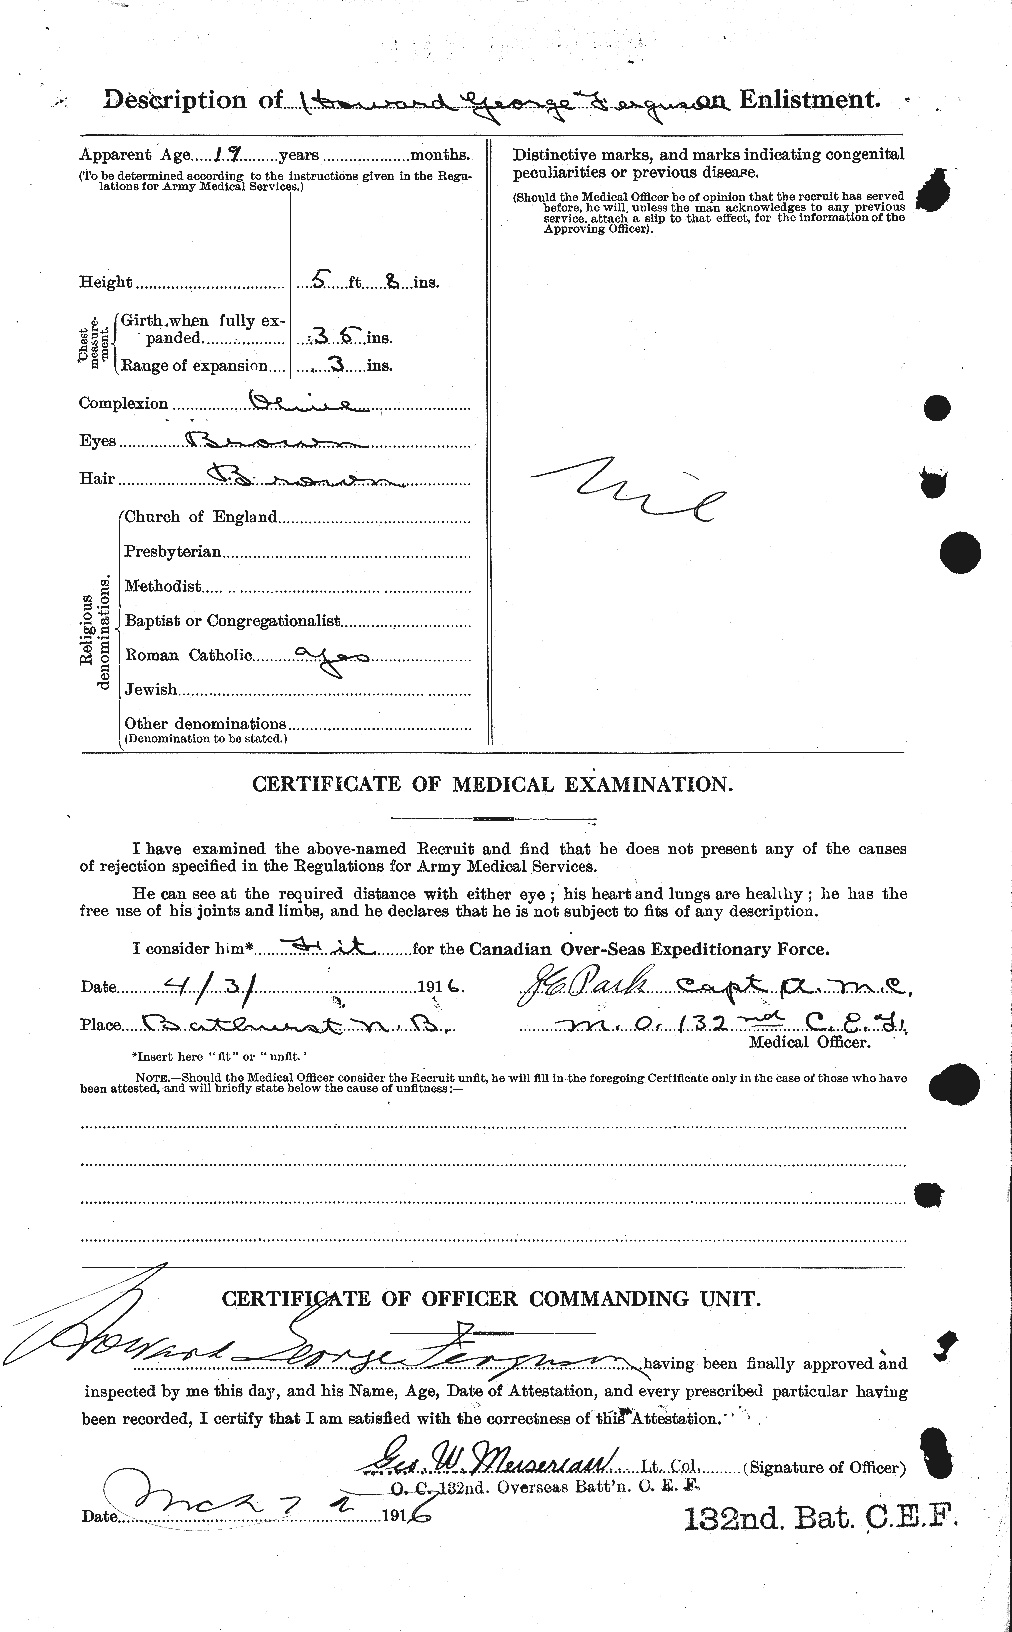 Personnel Records of the First World War - CEF 320205b